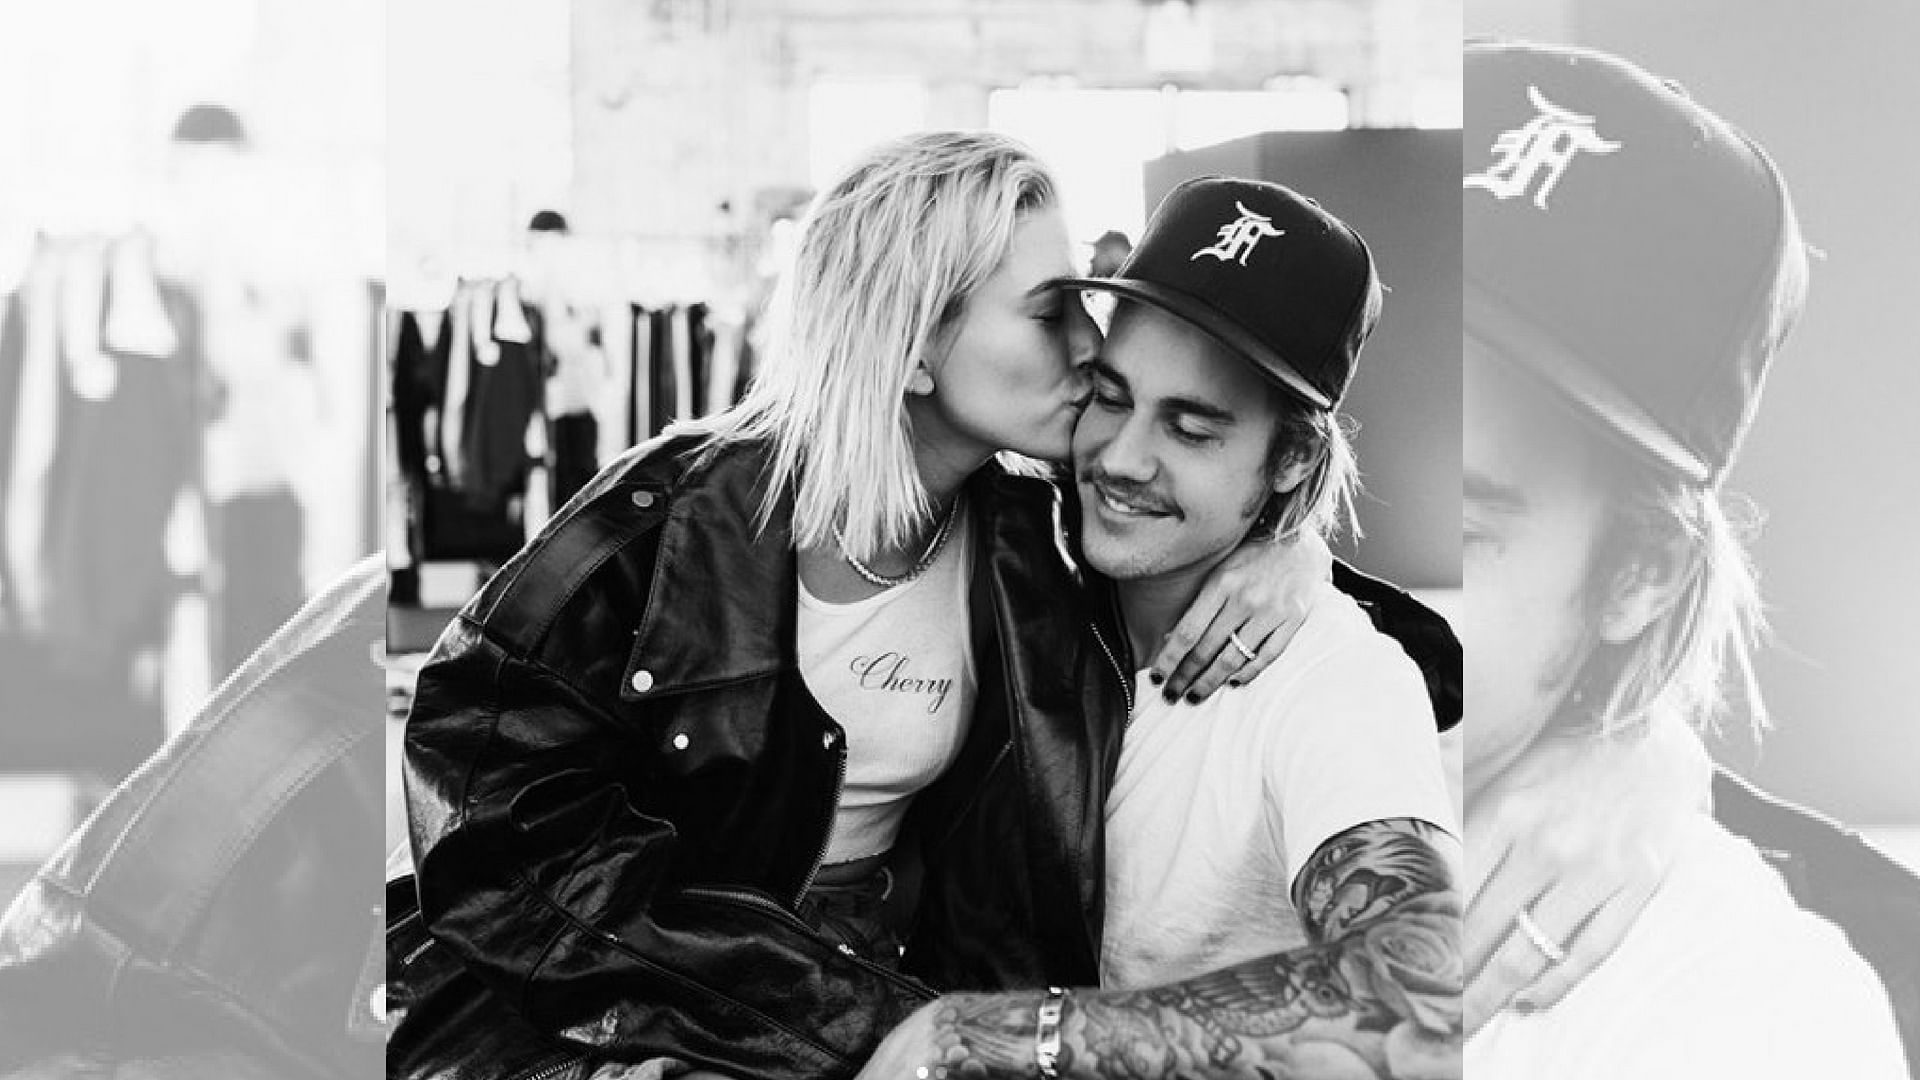 Hailey Baldwin and Justin Bieber  have  tied the knot.